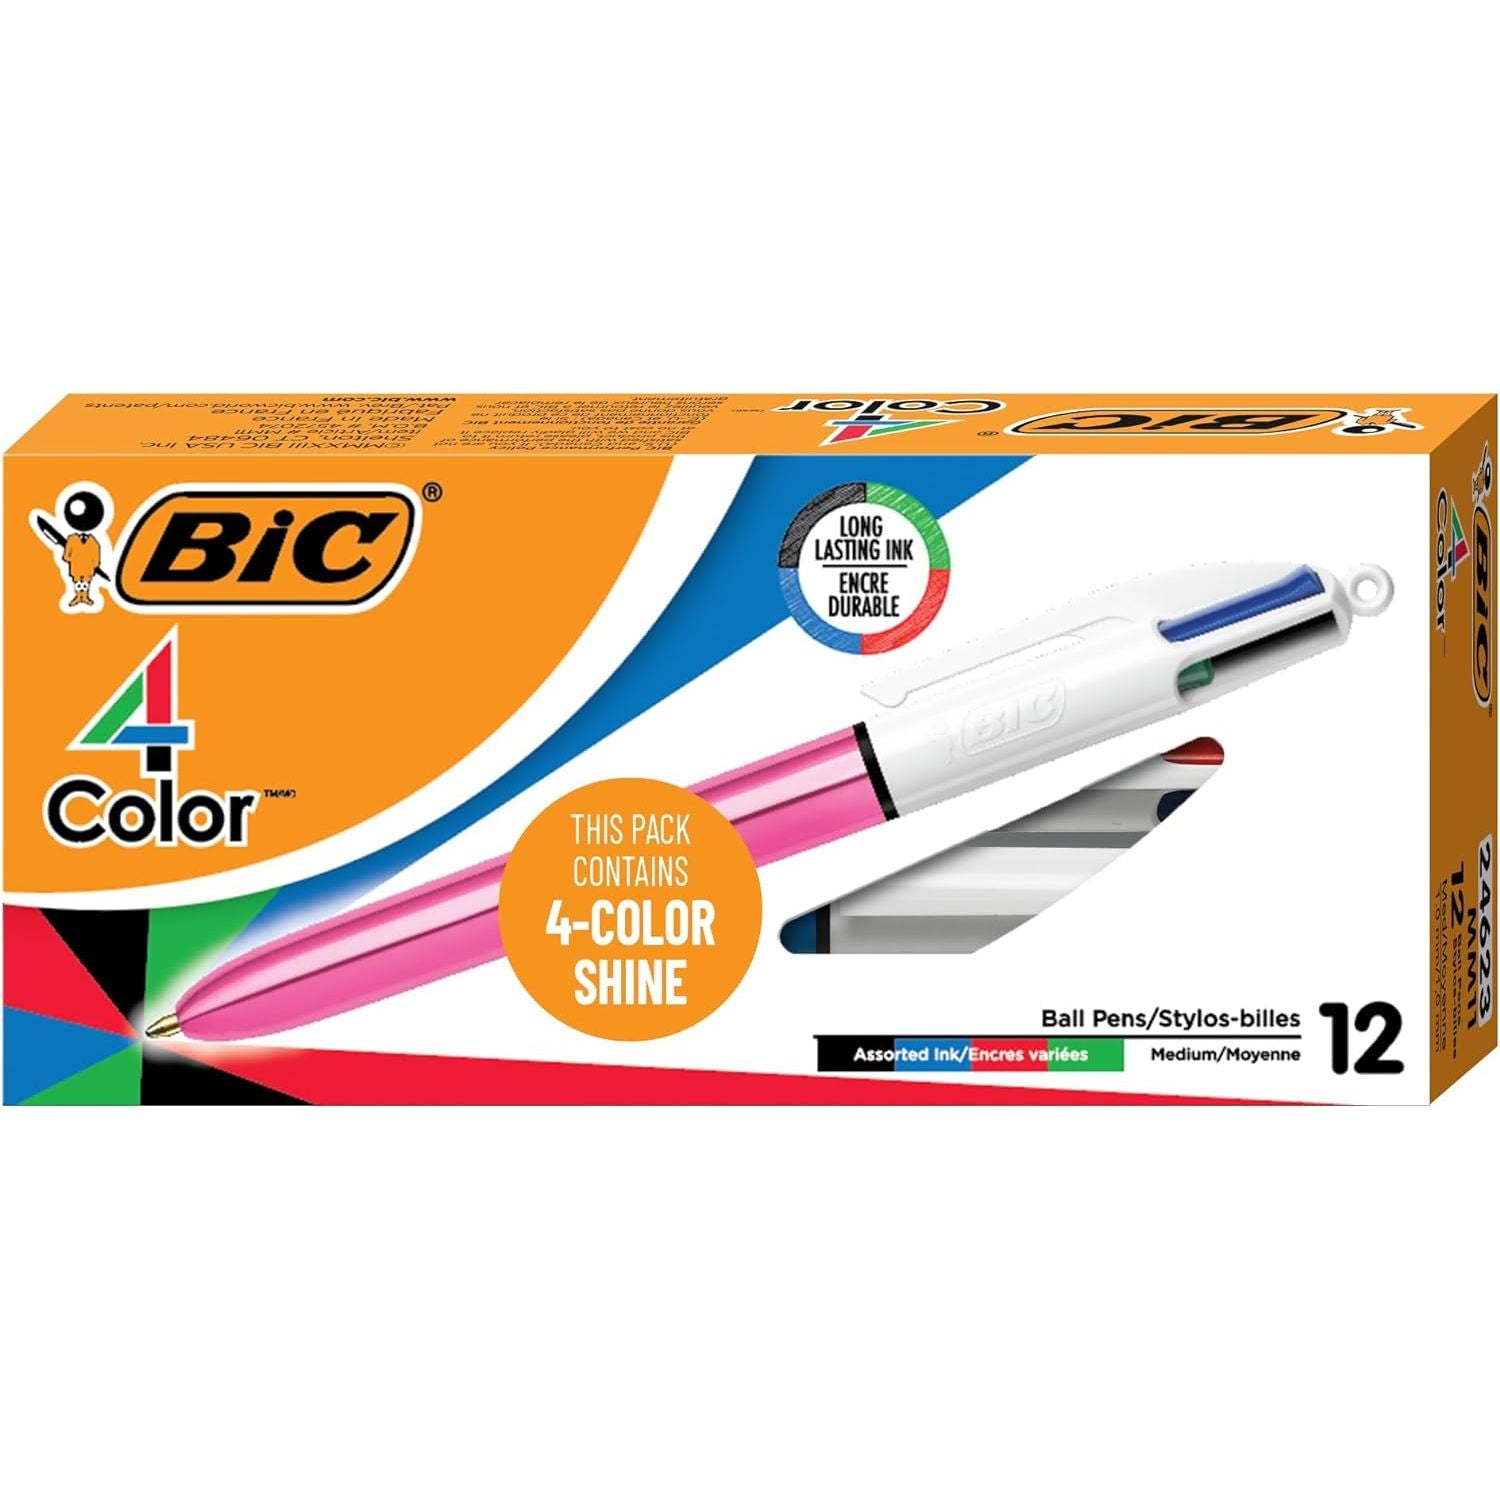 BIC 4-Color Shine Retractable Ball Pens, Medium Point (1.0mm), 12-Count Pack